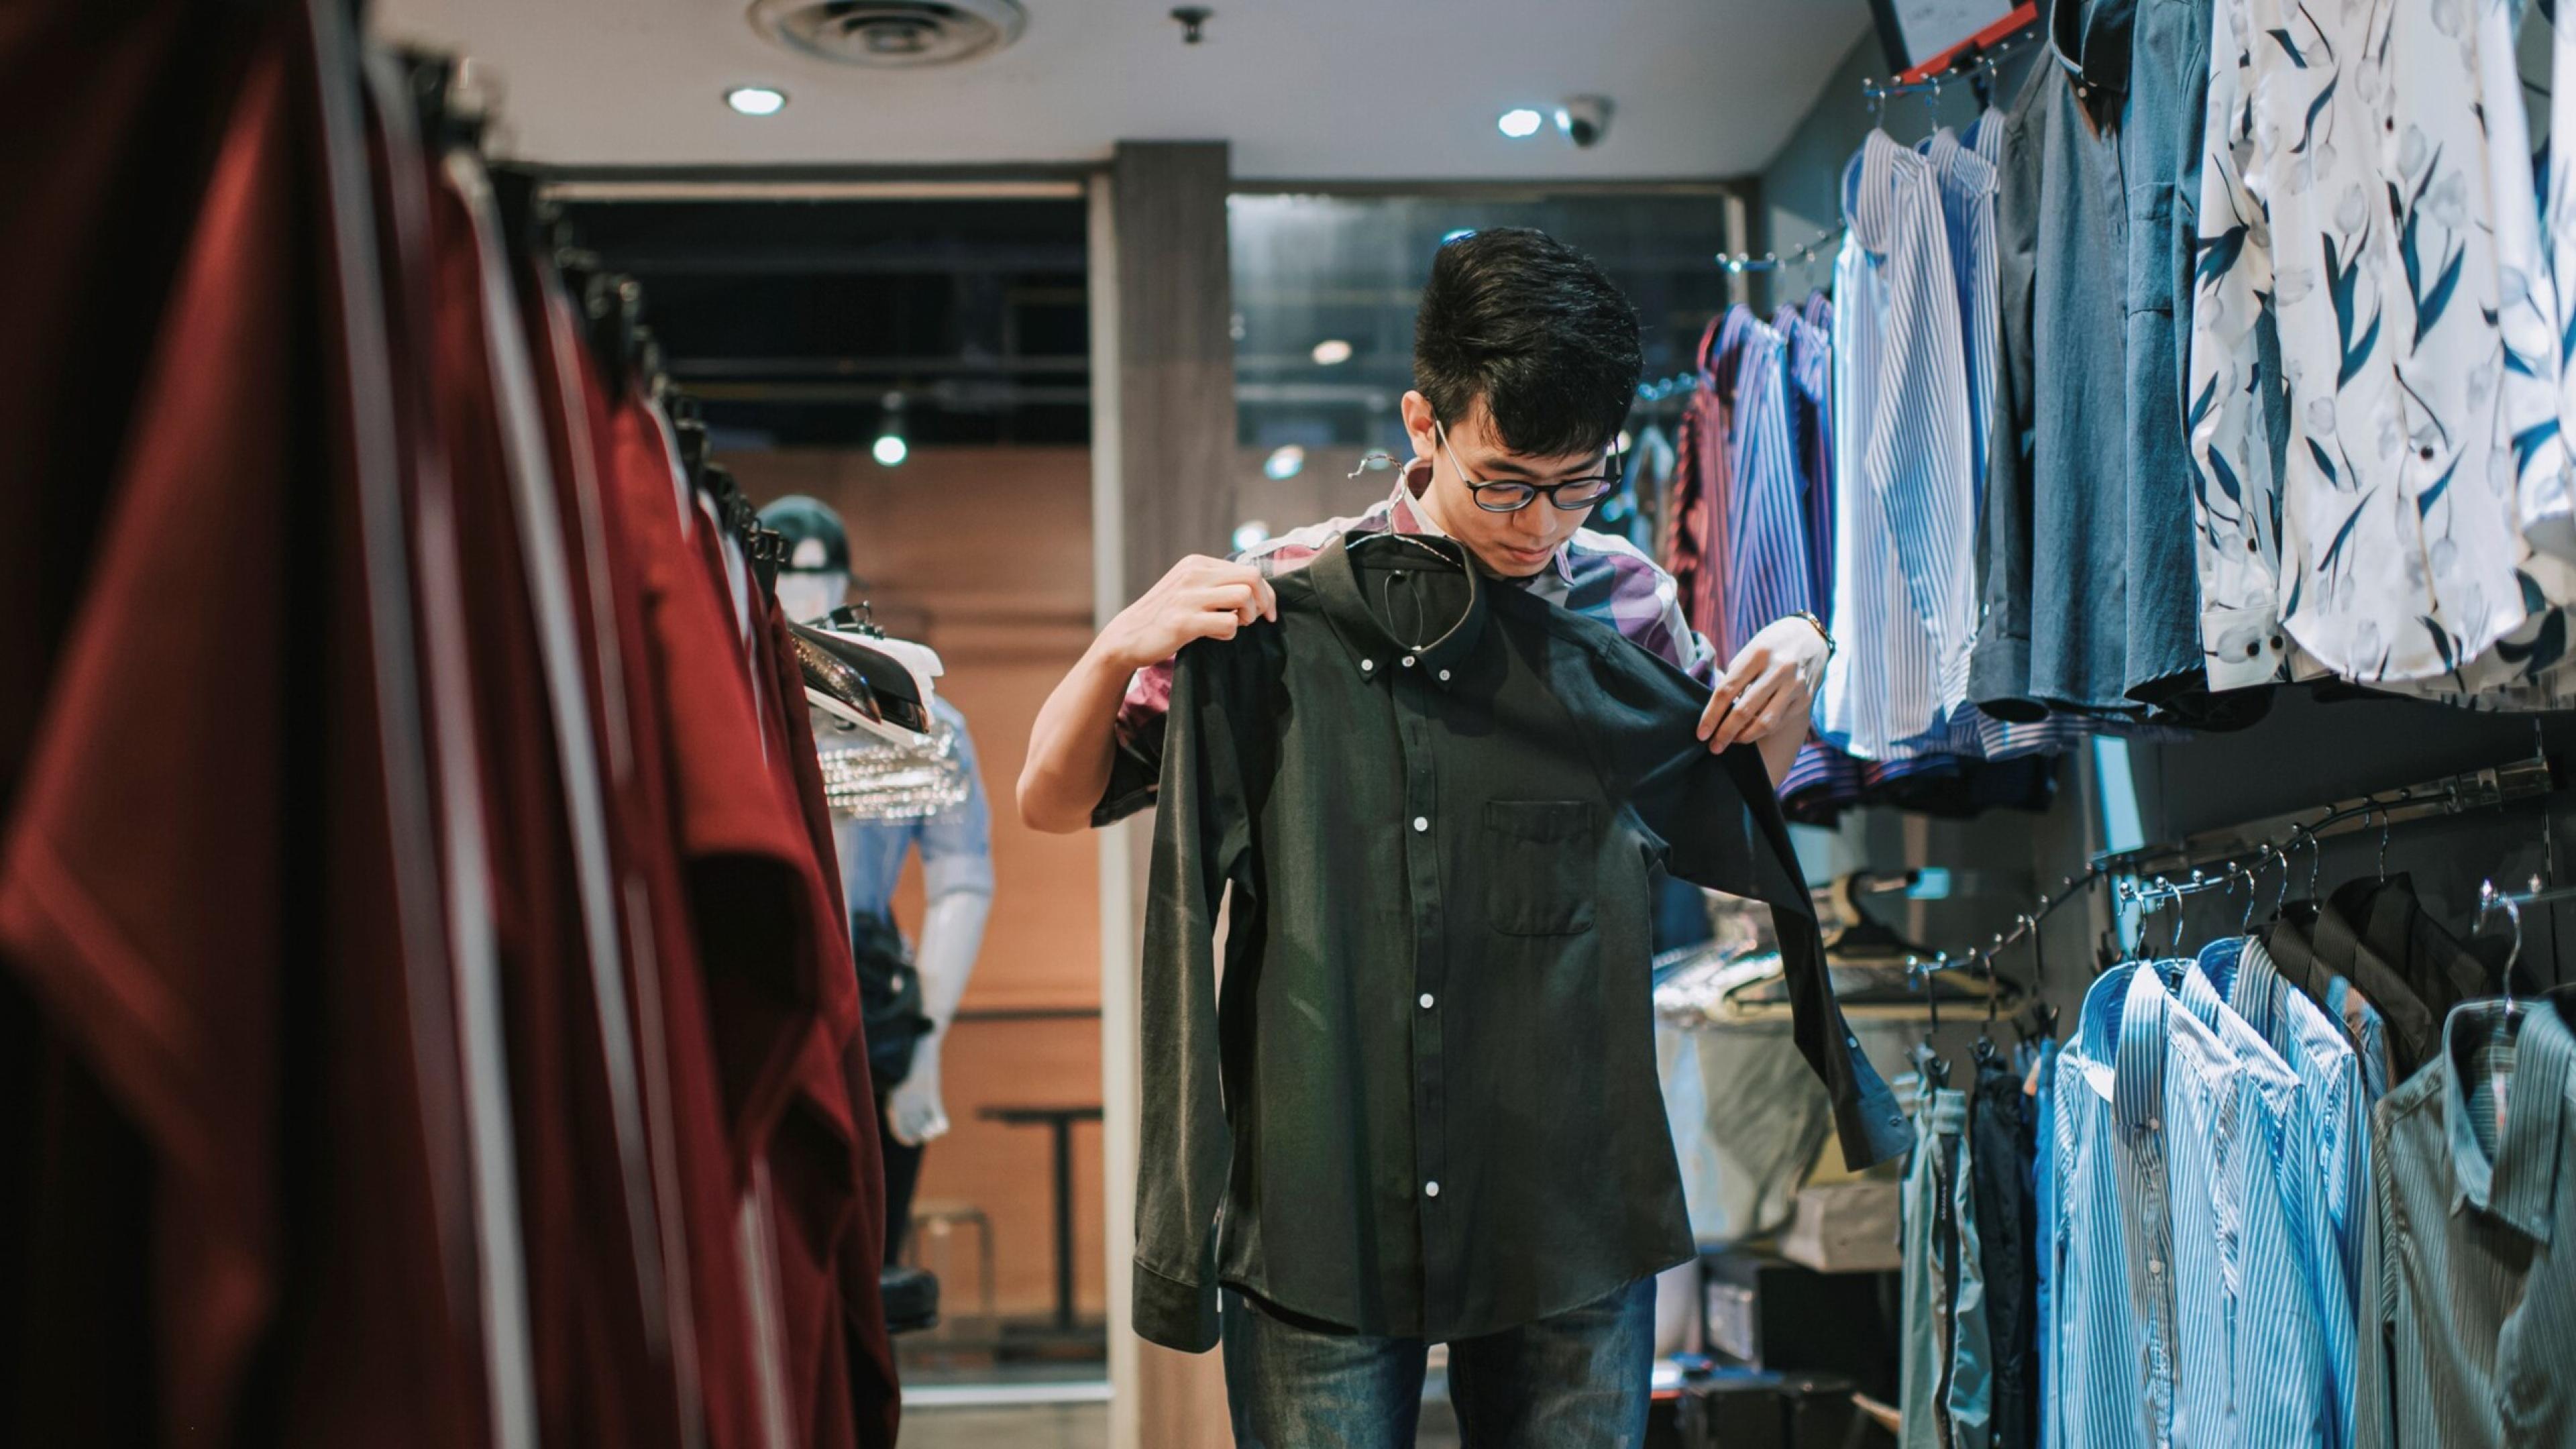 Young man trying on a shirt in store